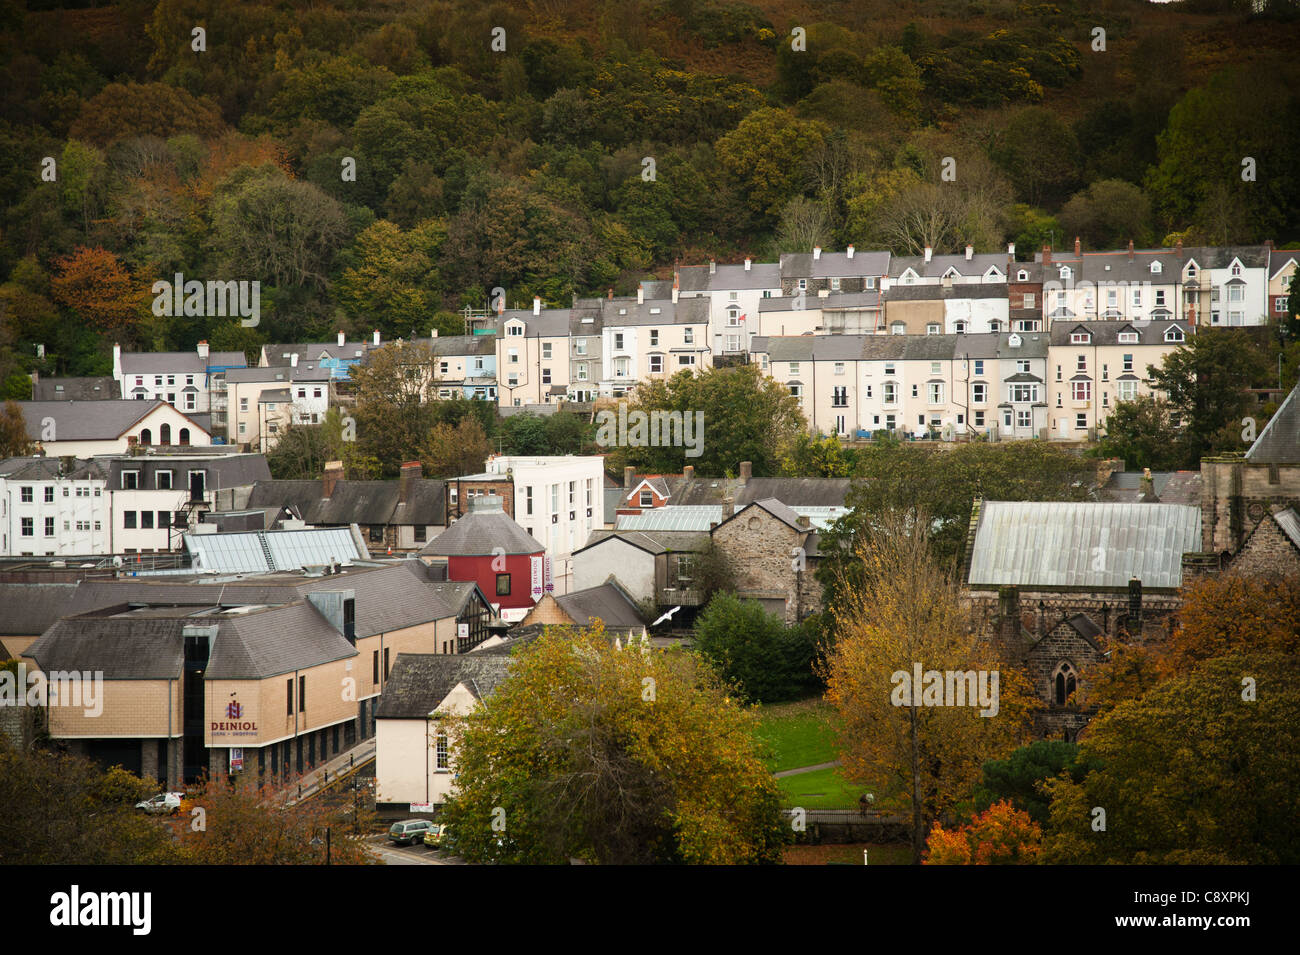 a general view of houses and shops in the city of Bangor, Gwynedd,  North Wales UK Stock Photo